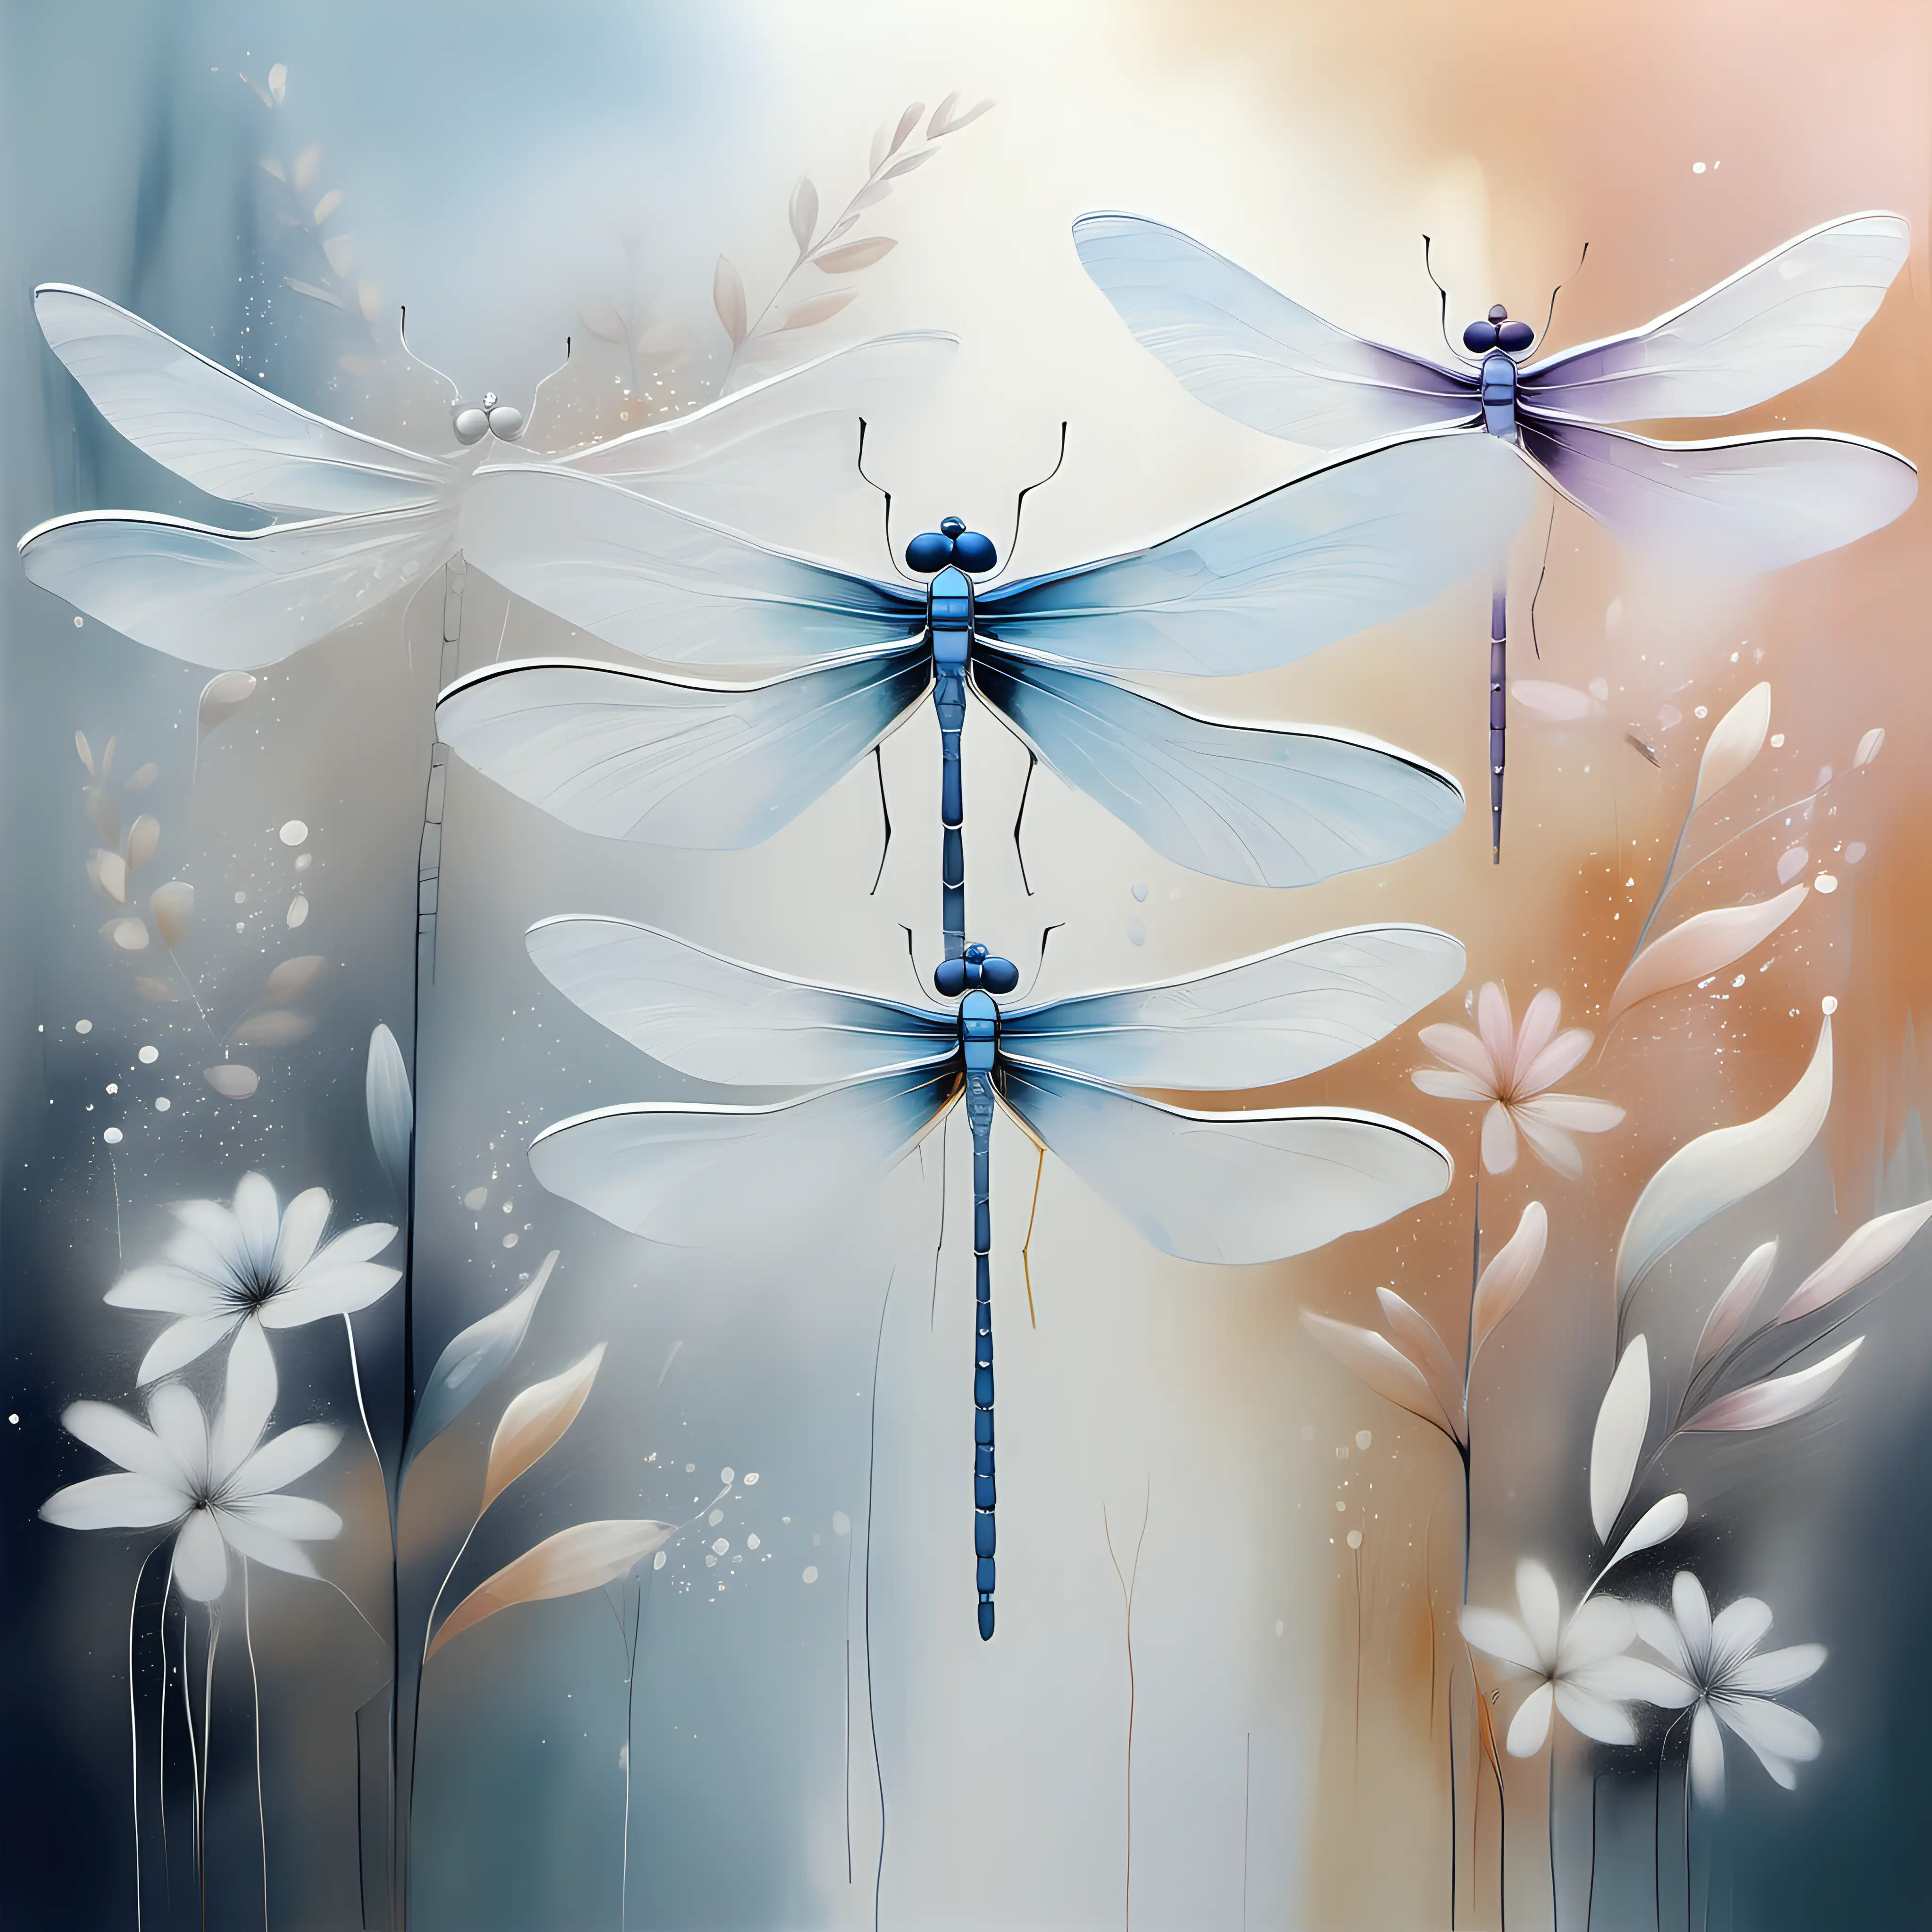 Ethereal Dragonflies Artistic Depiction in Pastel and White Colors